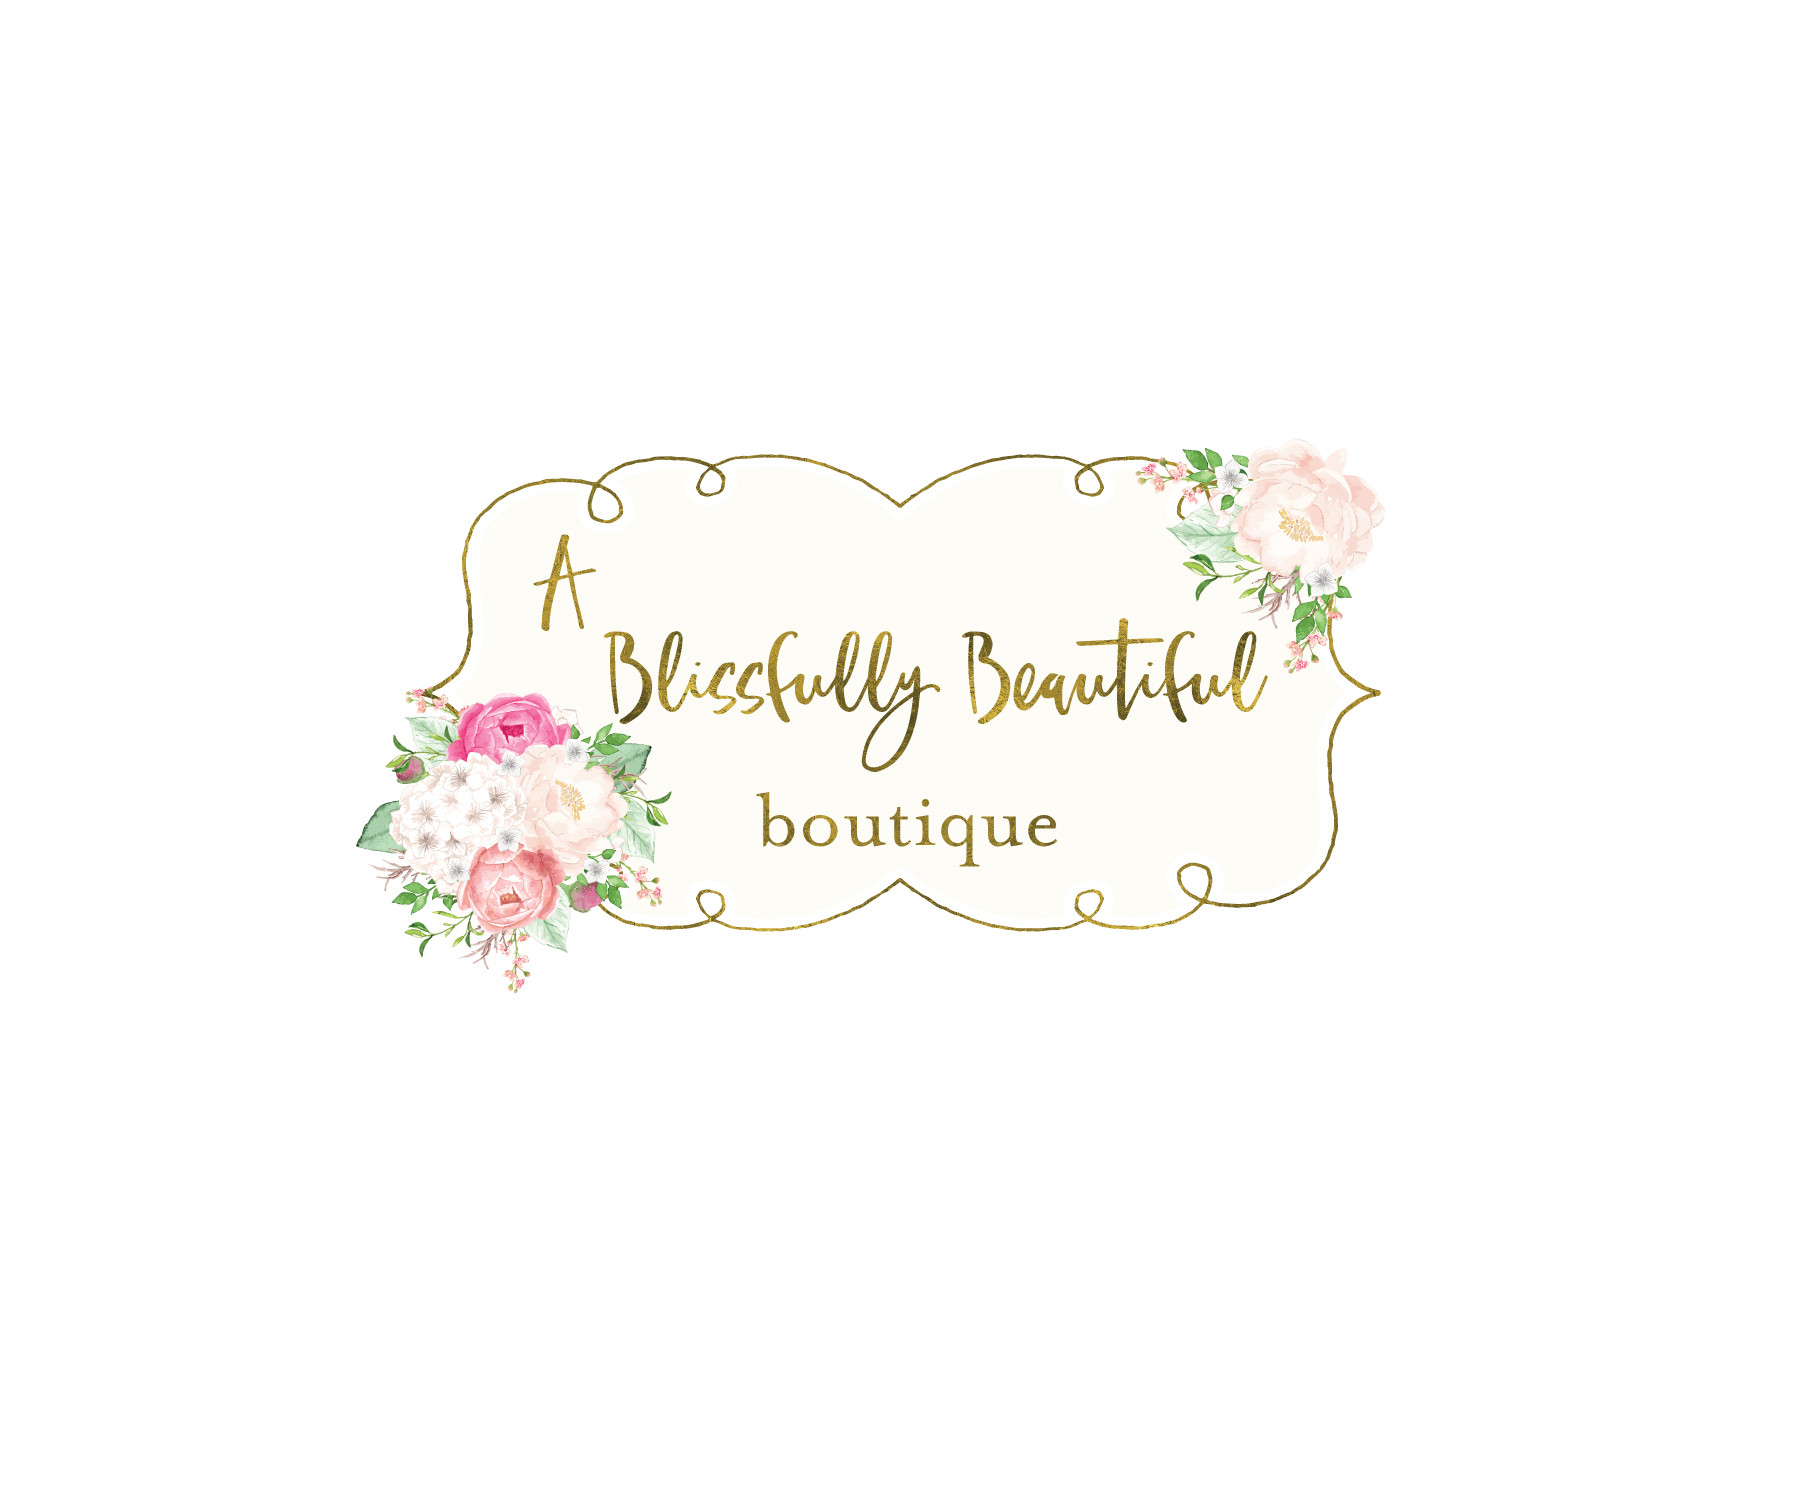 A Blissfully Beautiful Boutique coupons logo